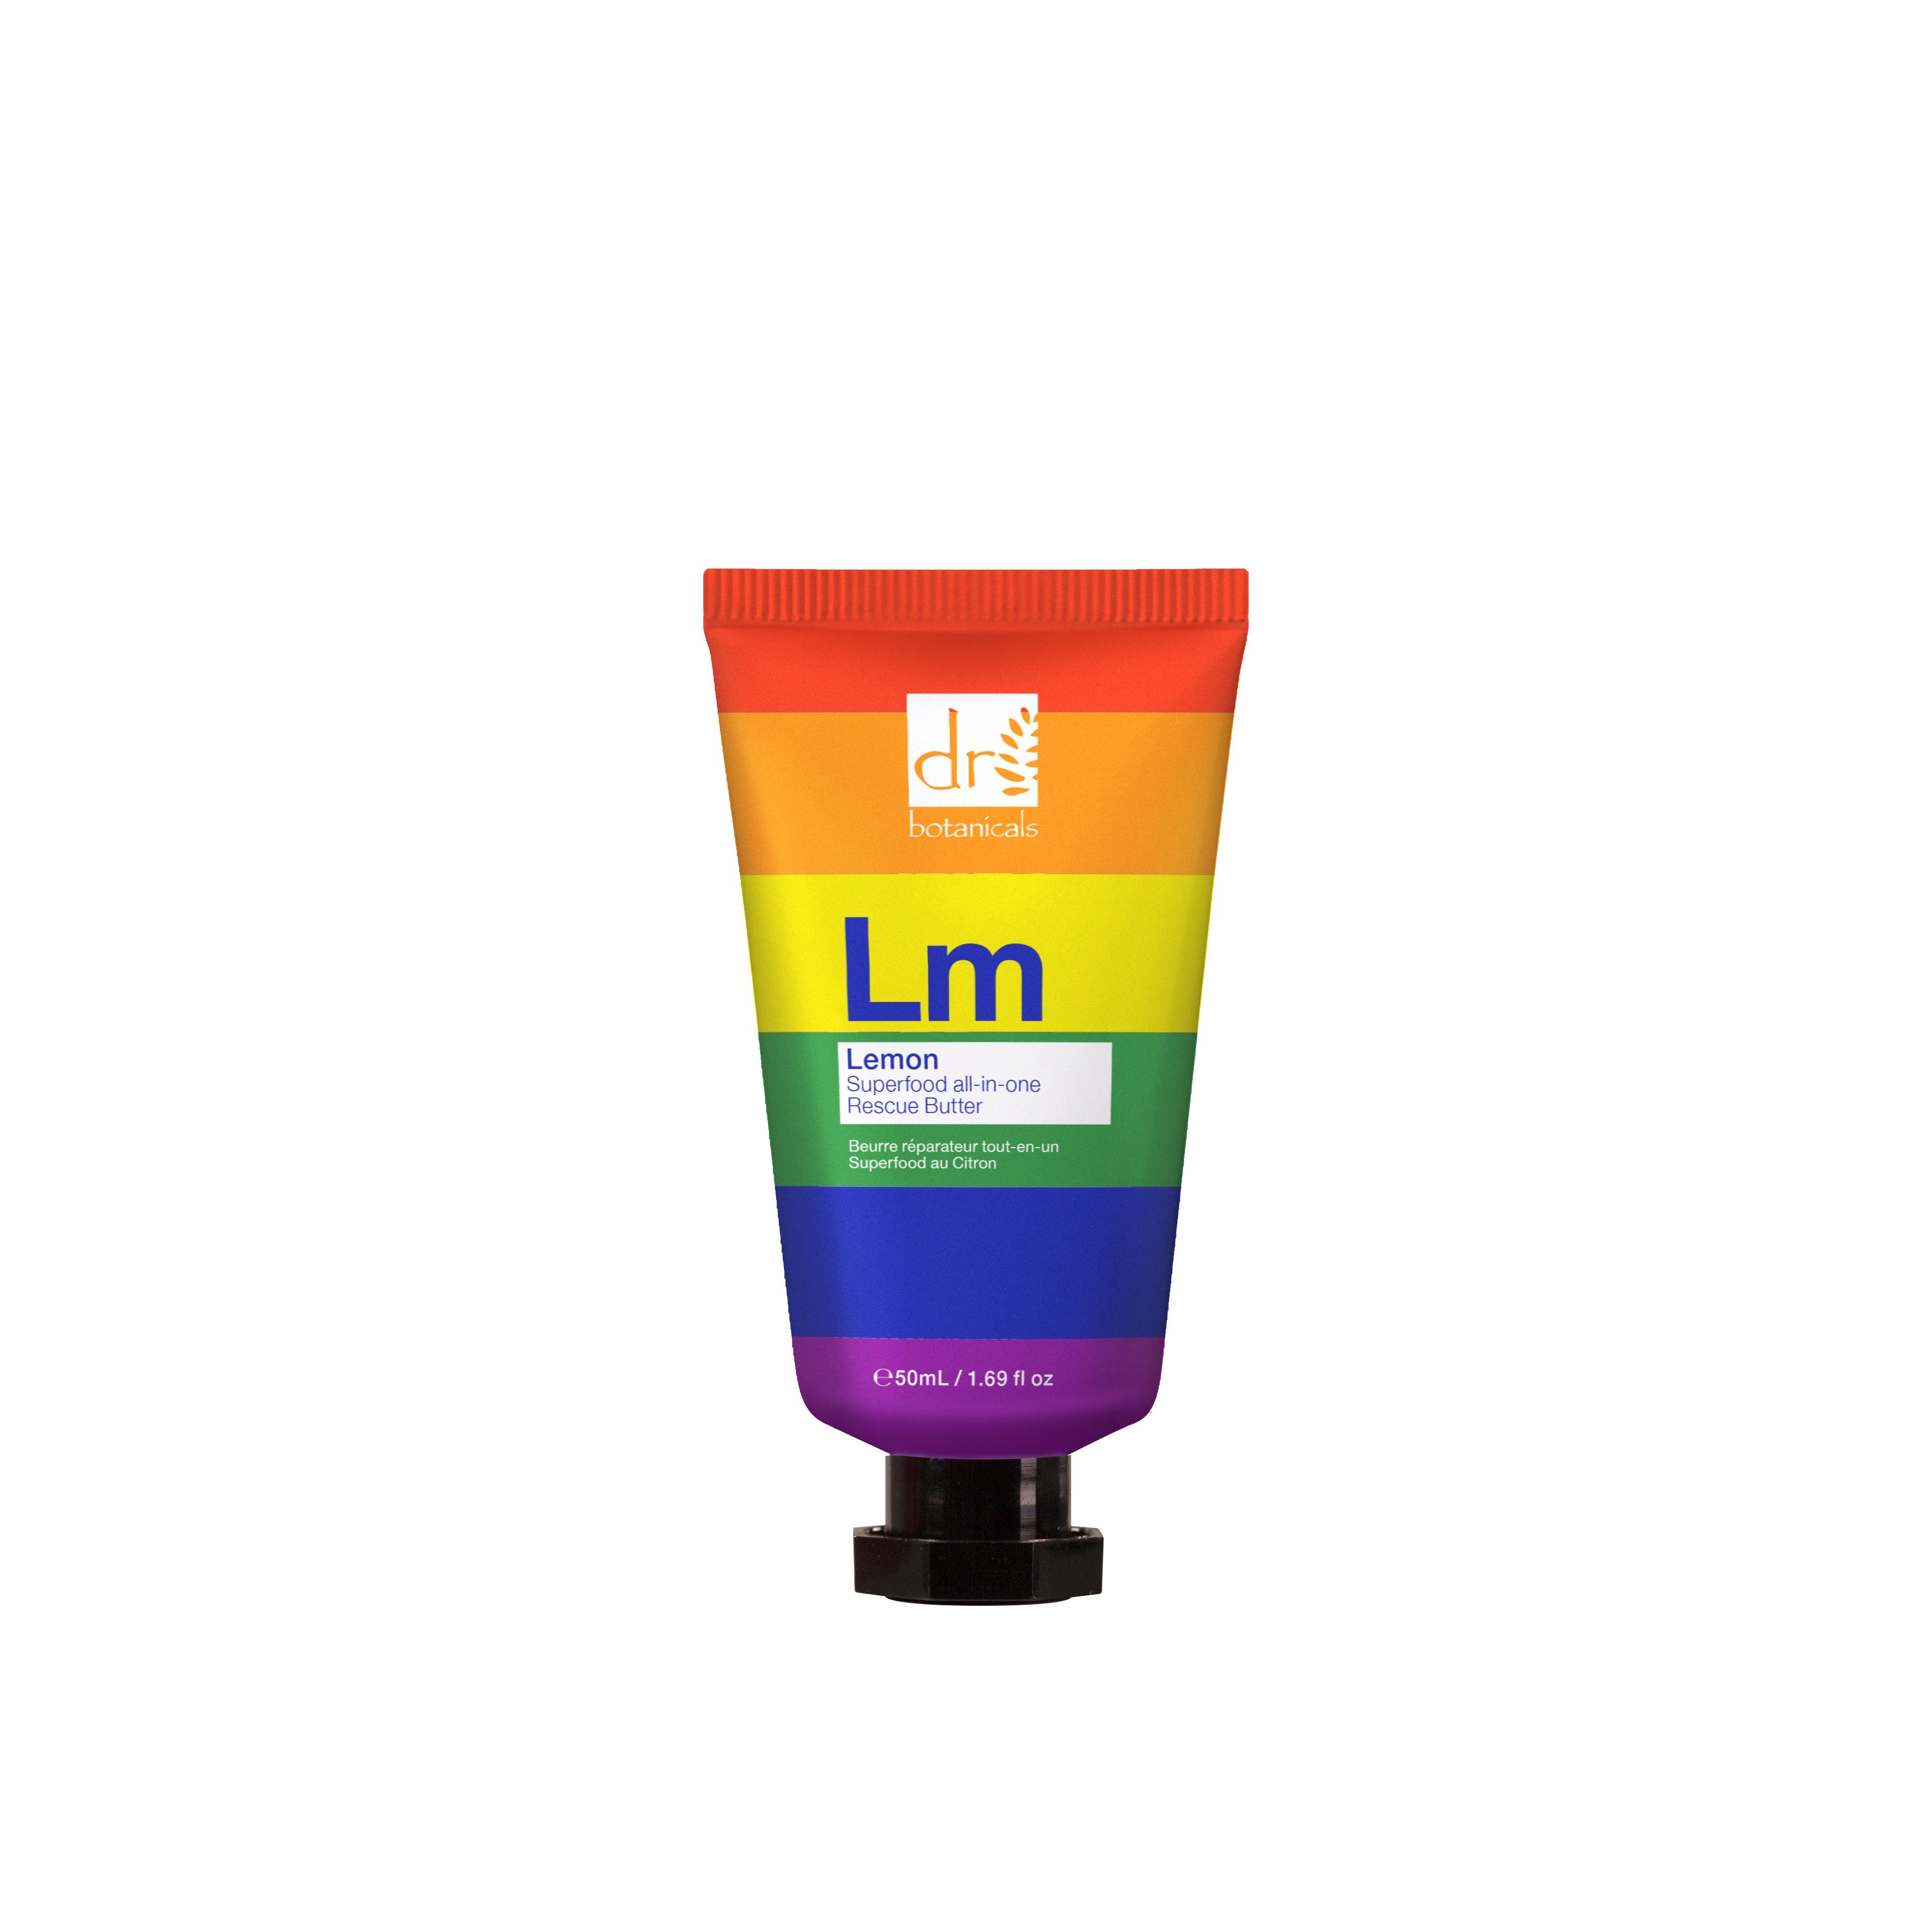 Pride Edition Lemon Superfood All-In-One Rescue Butter 50ml